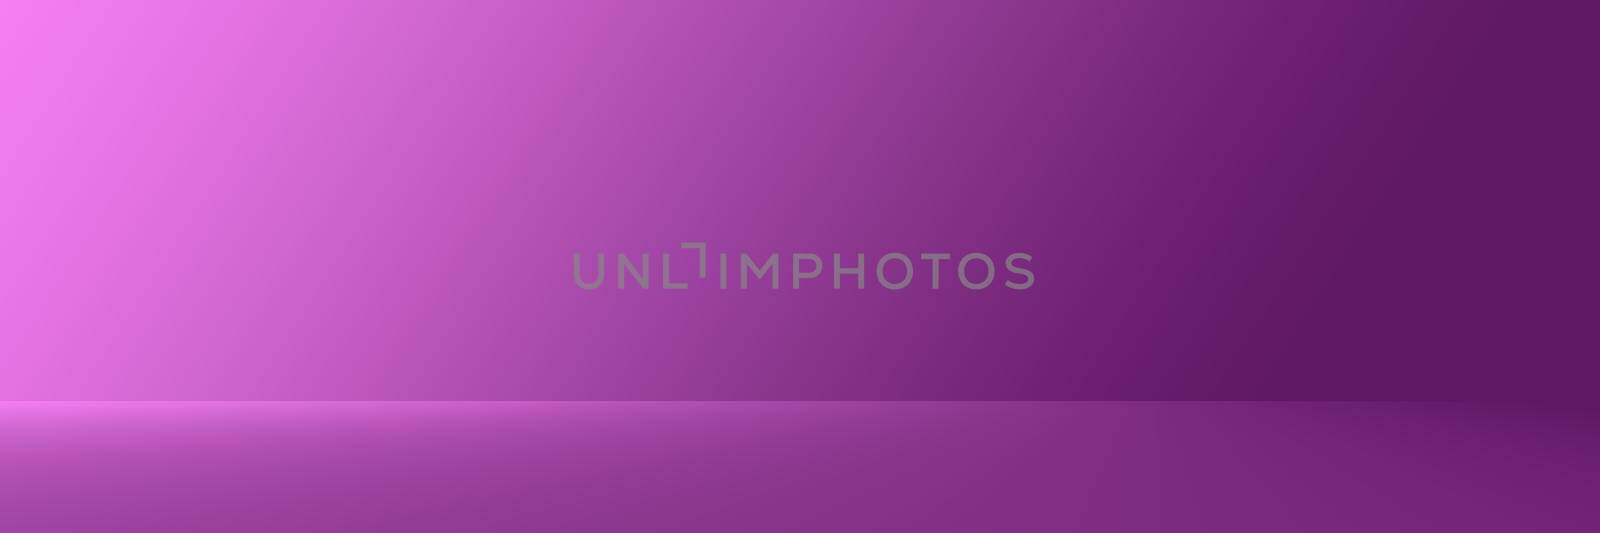 Studio Background - Abstract Bright luxury purple Gradient horizontal studio room wall background for display product ad website template. by Benzoix